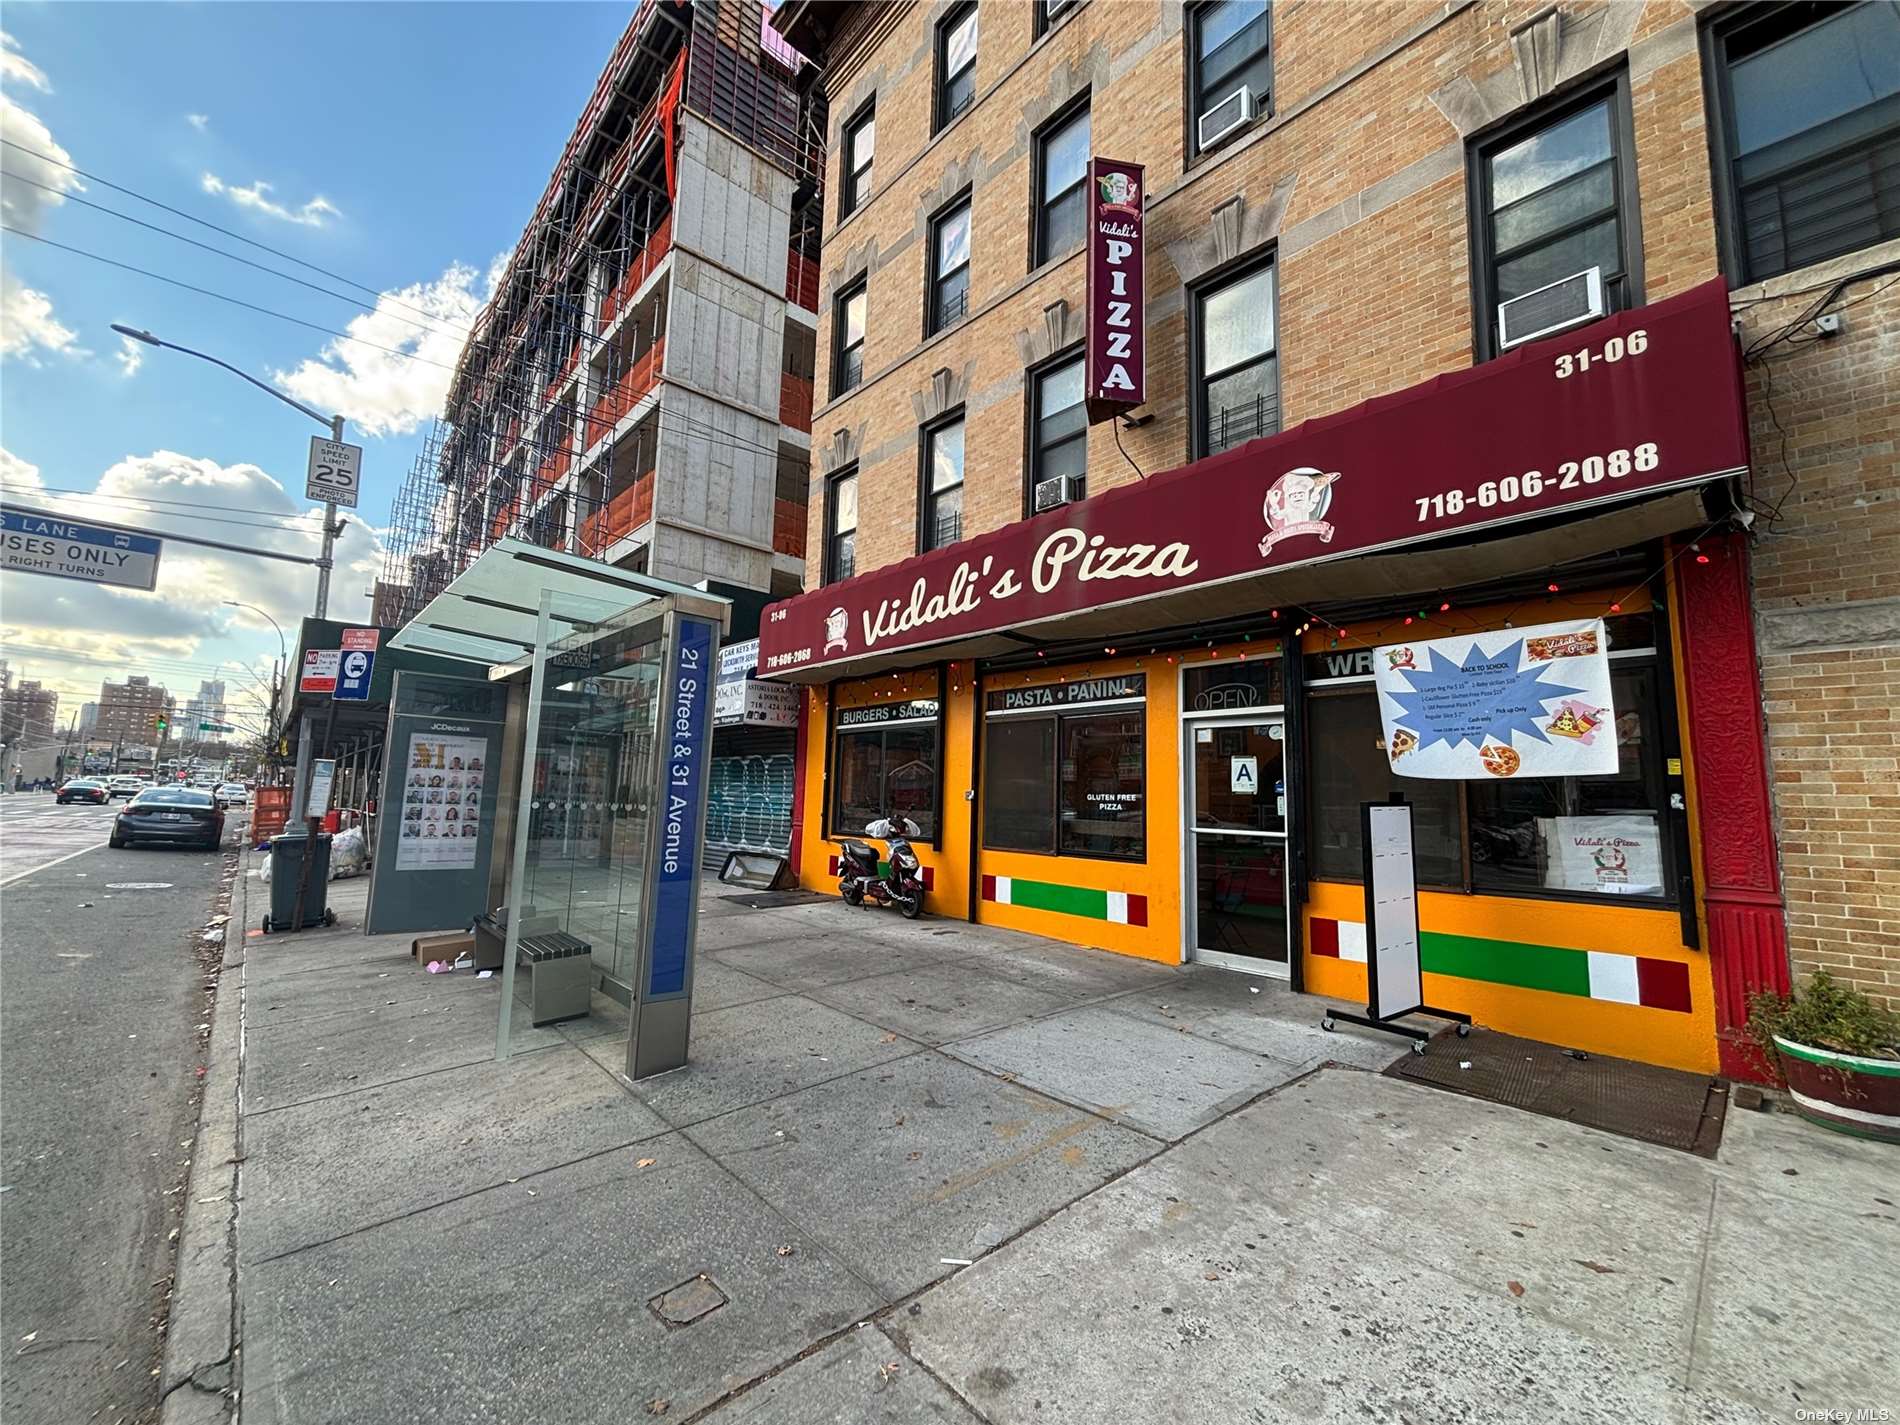 Business Opportunity in Astoria - 21 St  Queens, NY 11106